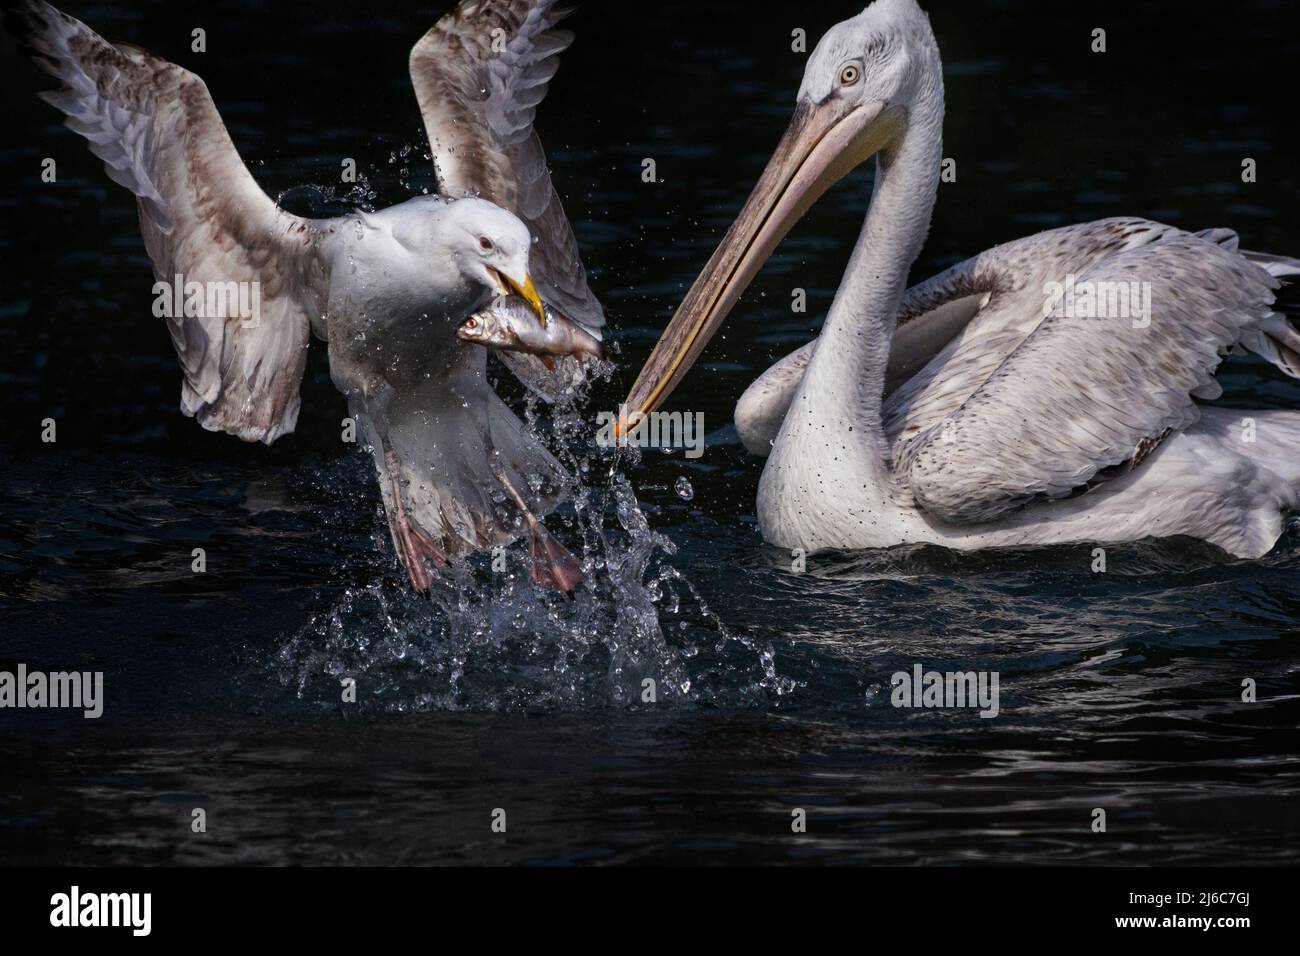 Gull swopping down to steal a fish from a Pelican, West Sussex, UK Stock Photo